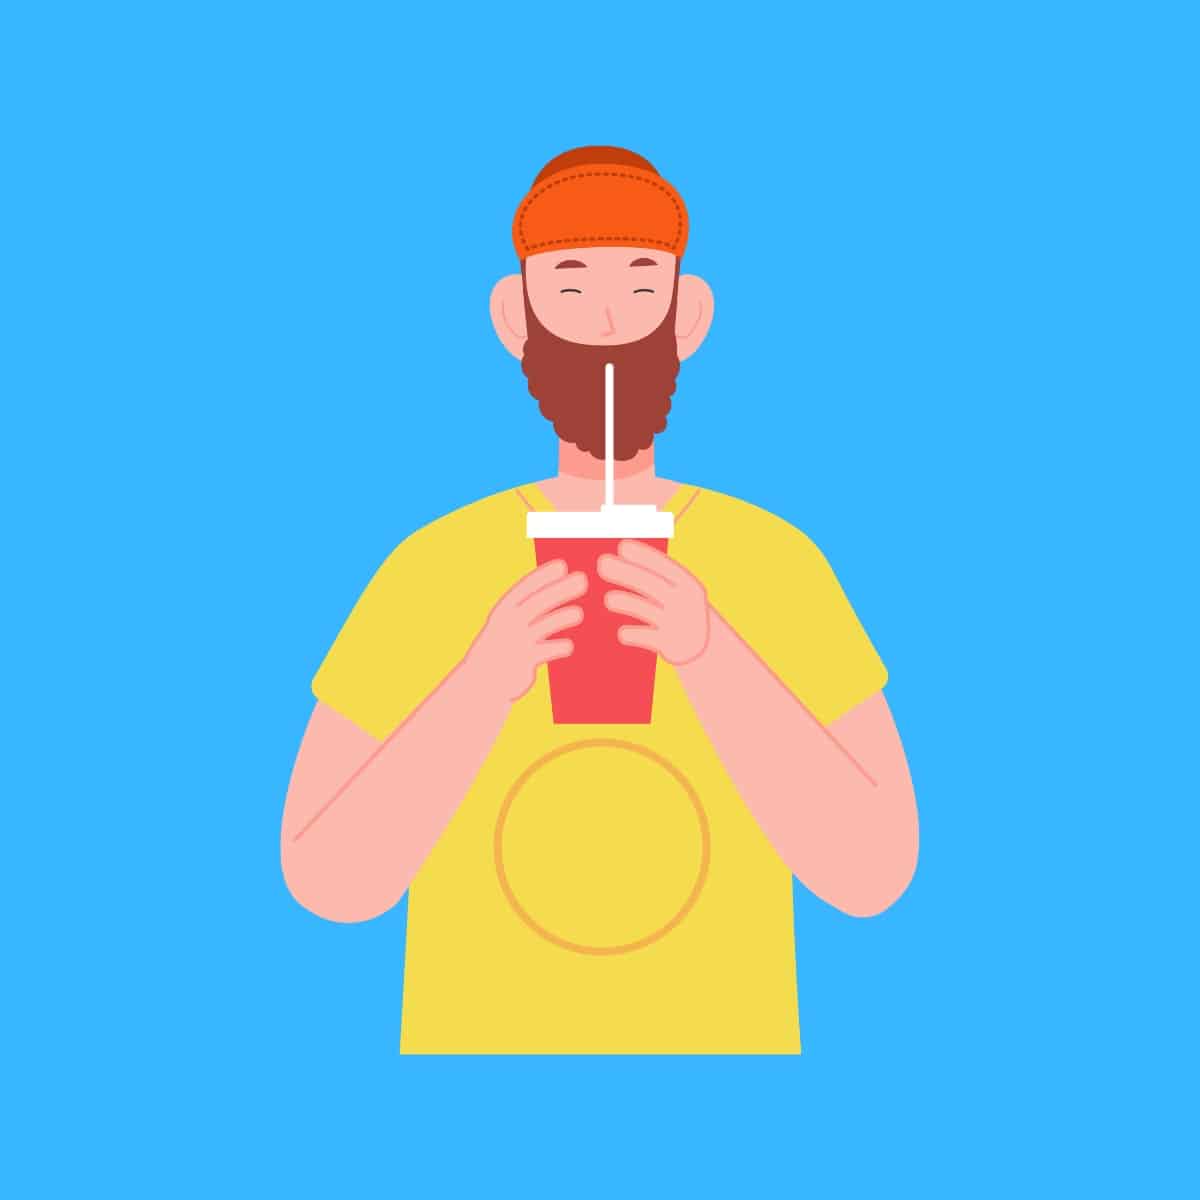 Cartoon graphic of a man with a beard sipping a drink through a long white straw on a blue background.